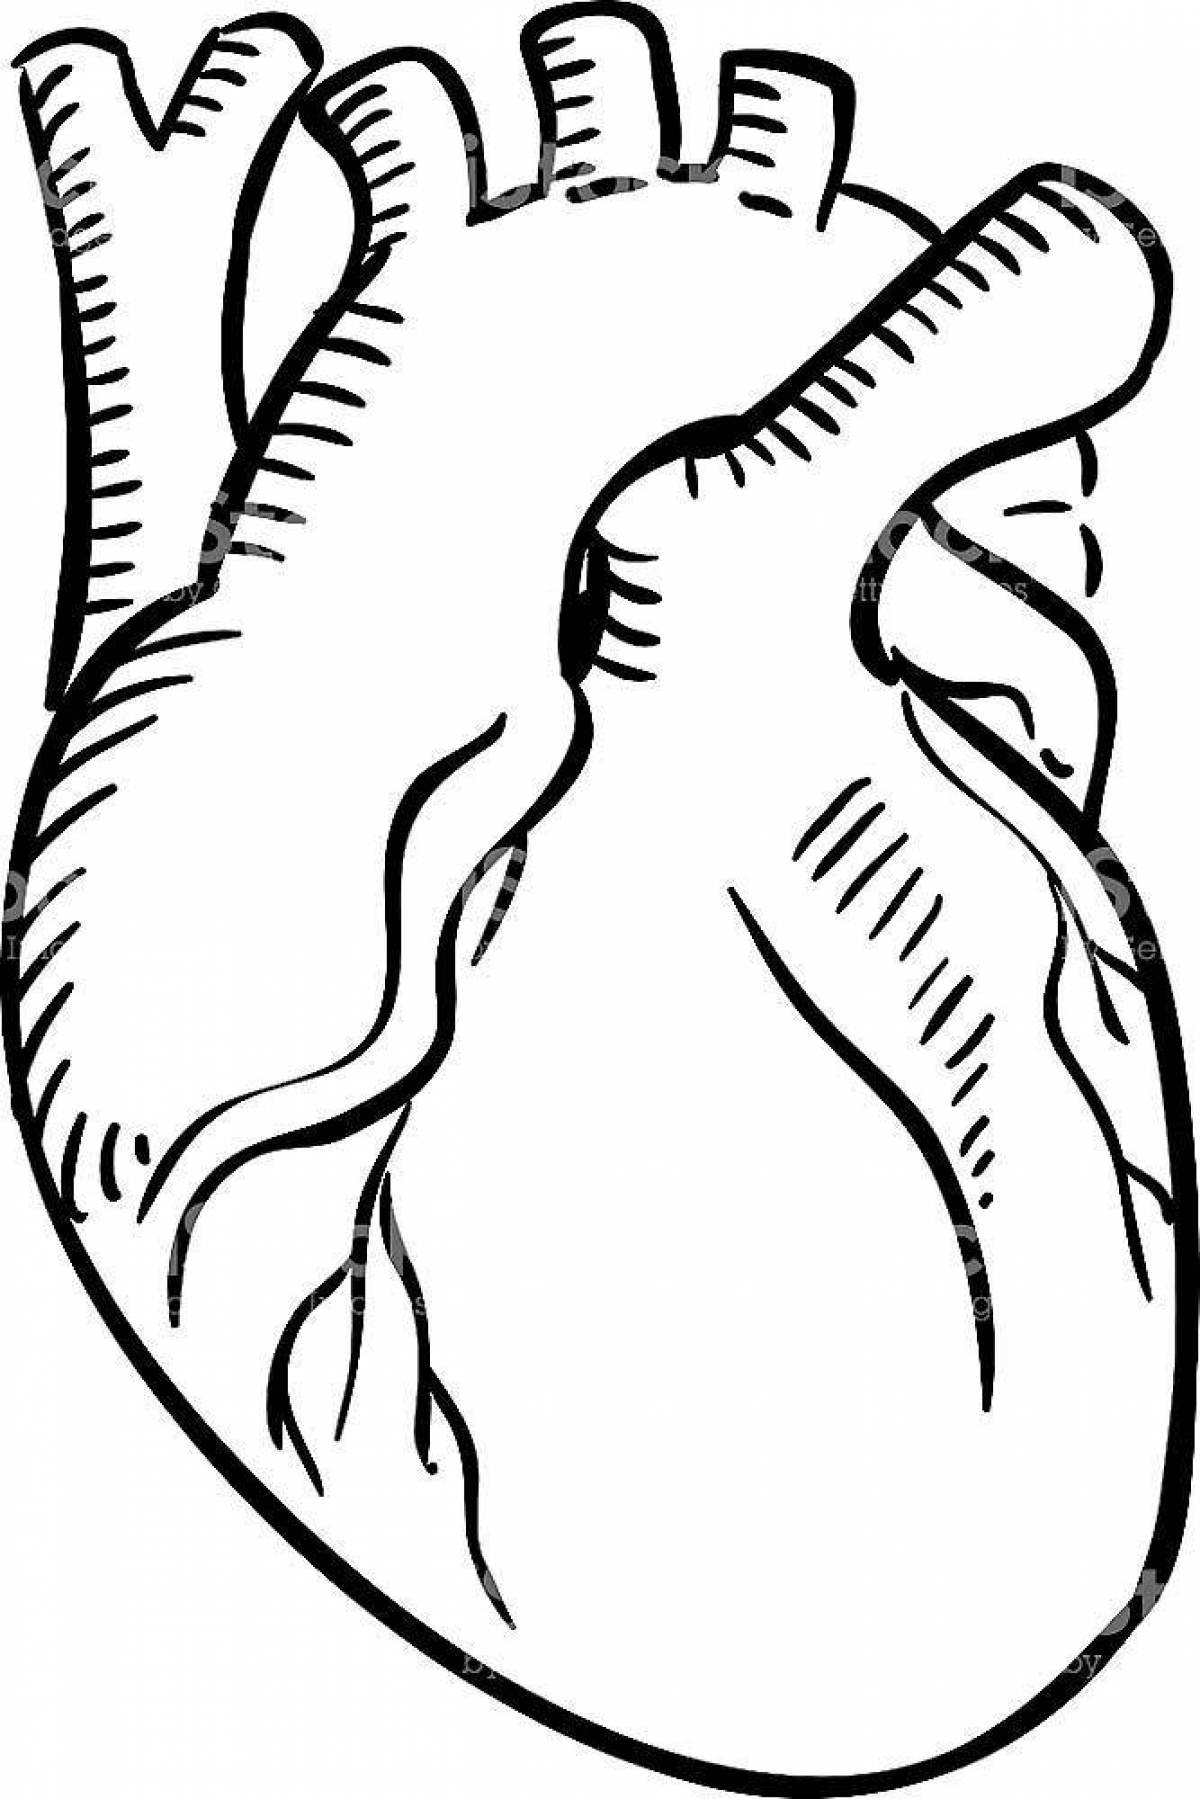 Human heart coloring page